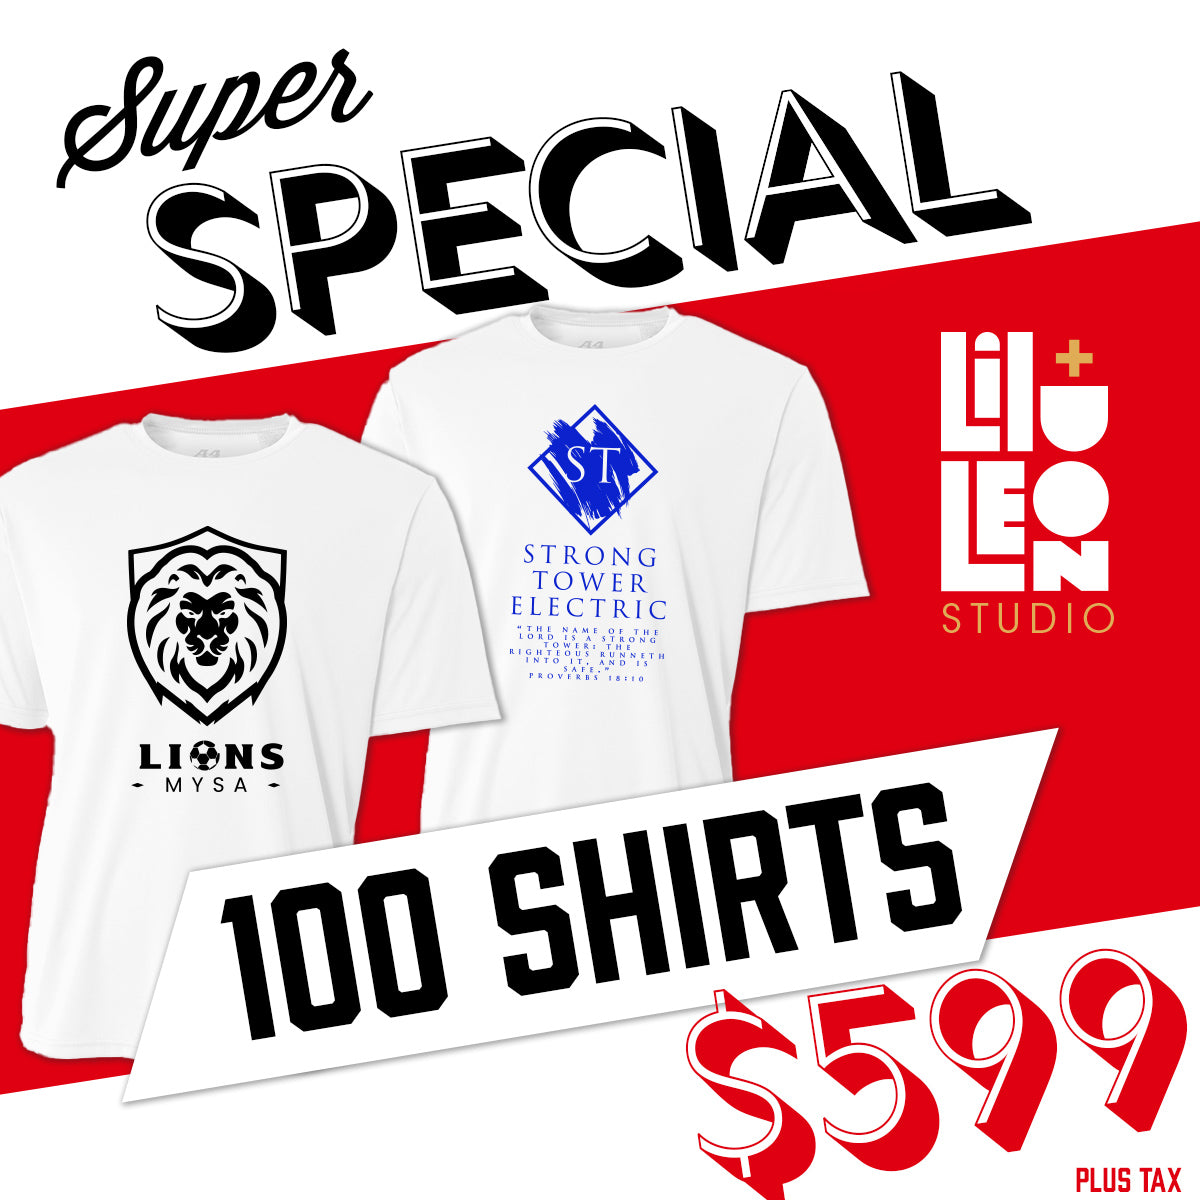 100 Shirts for $599